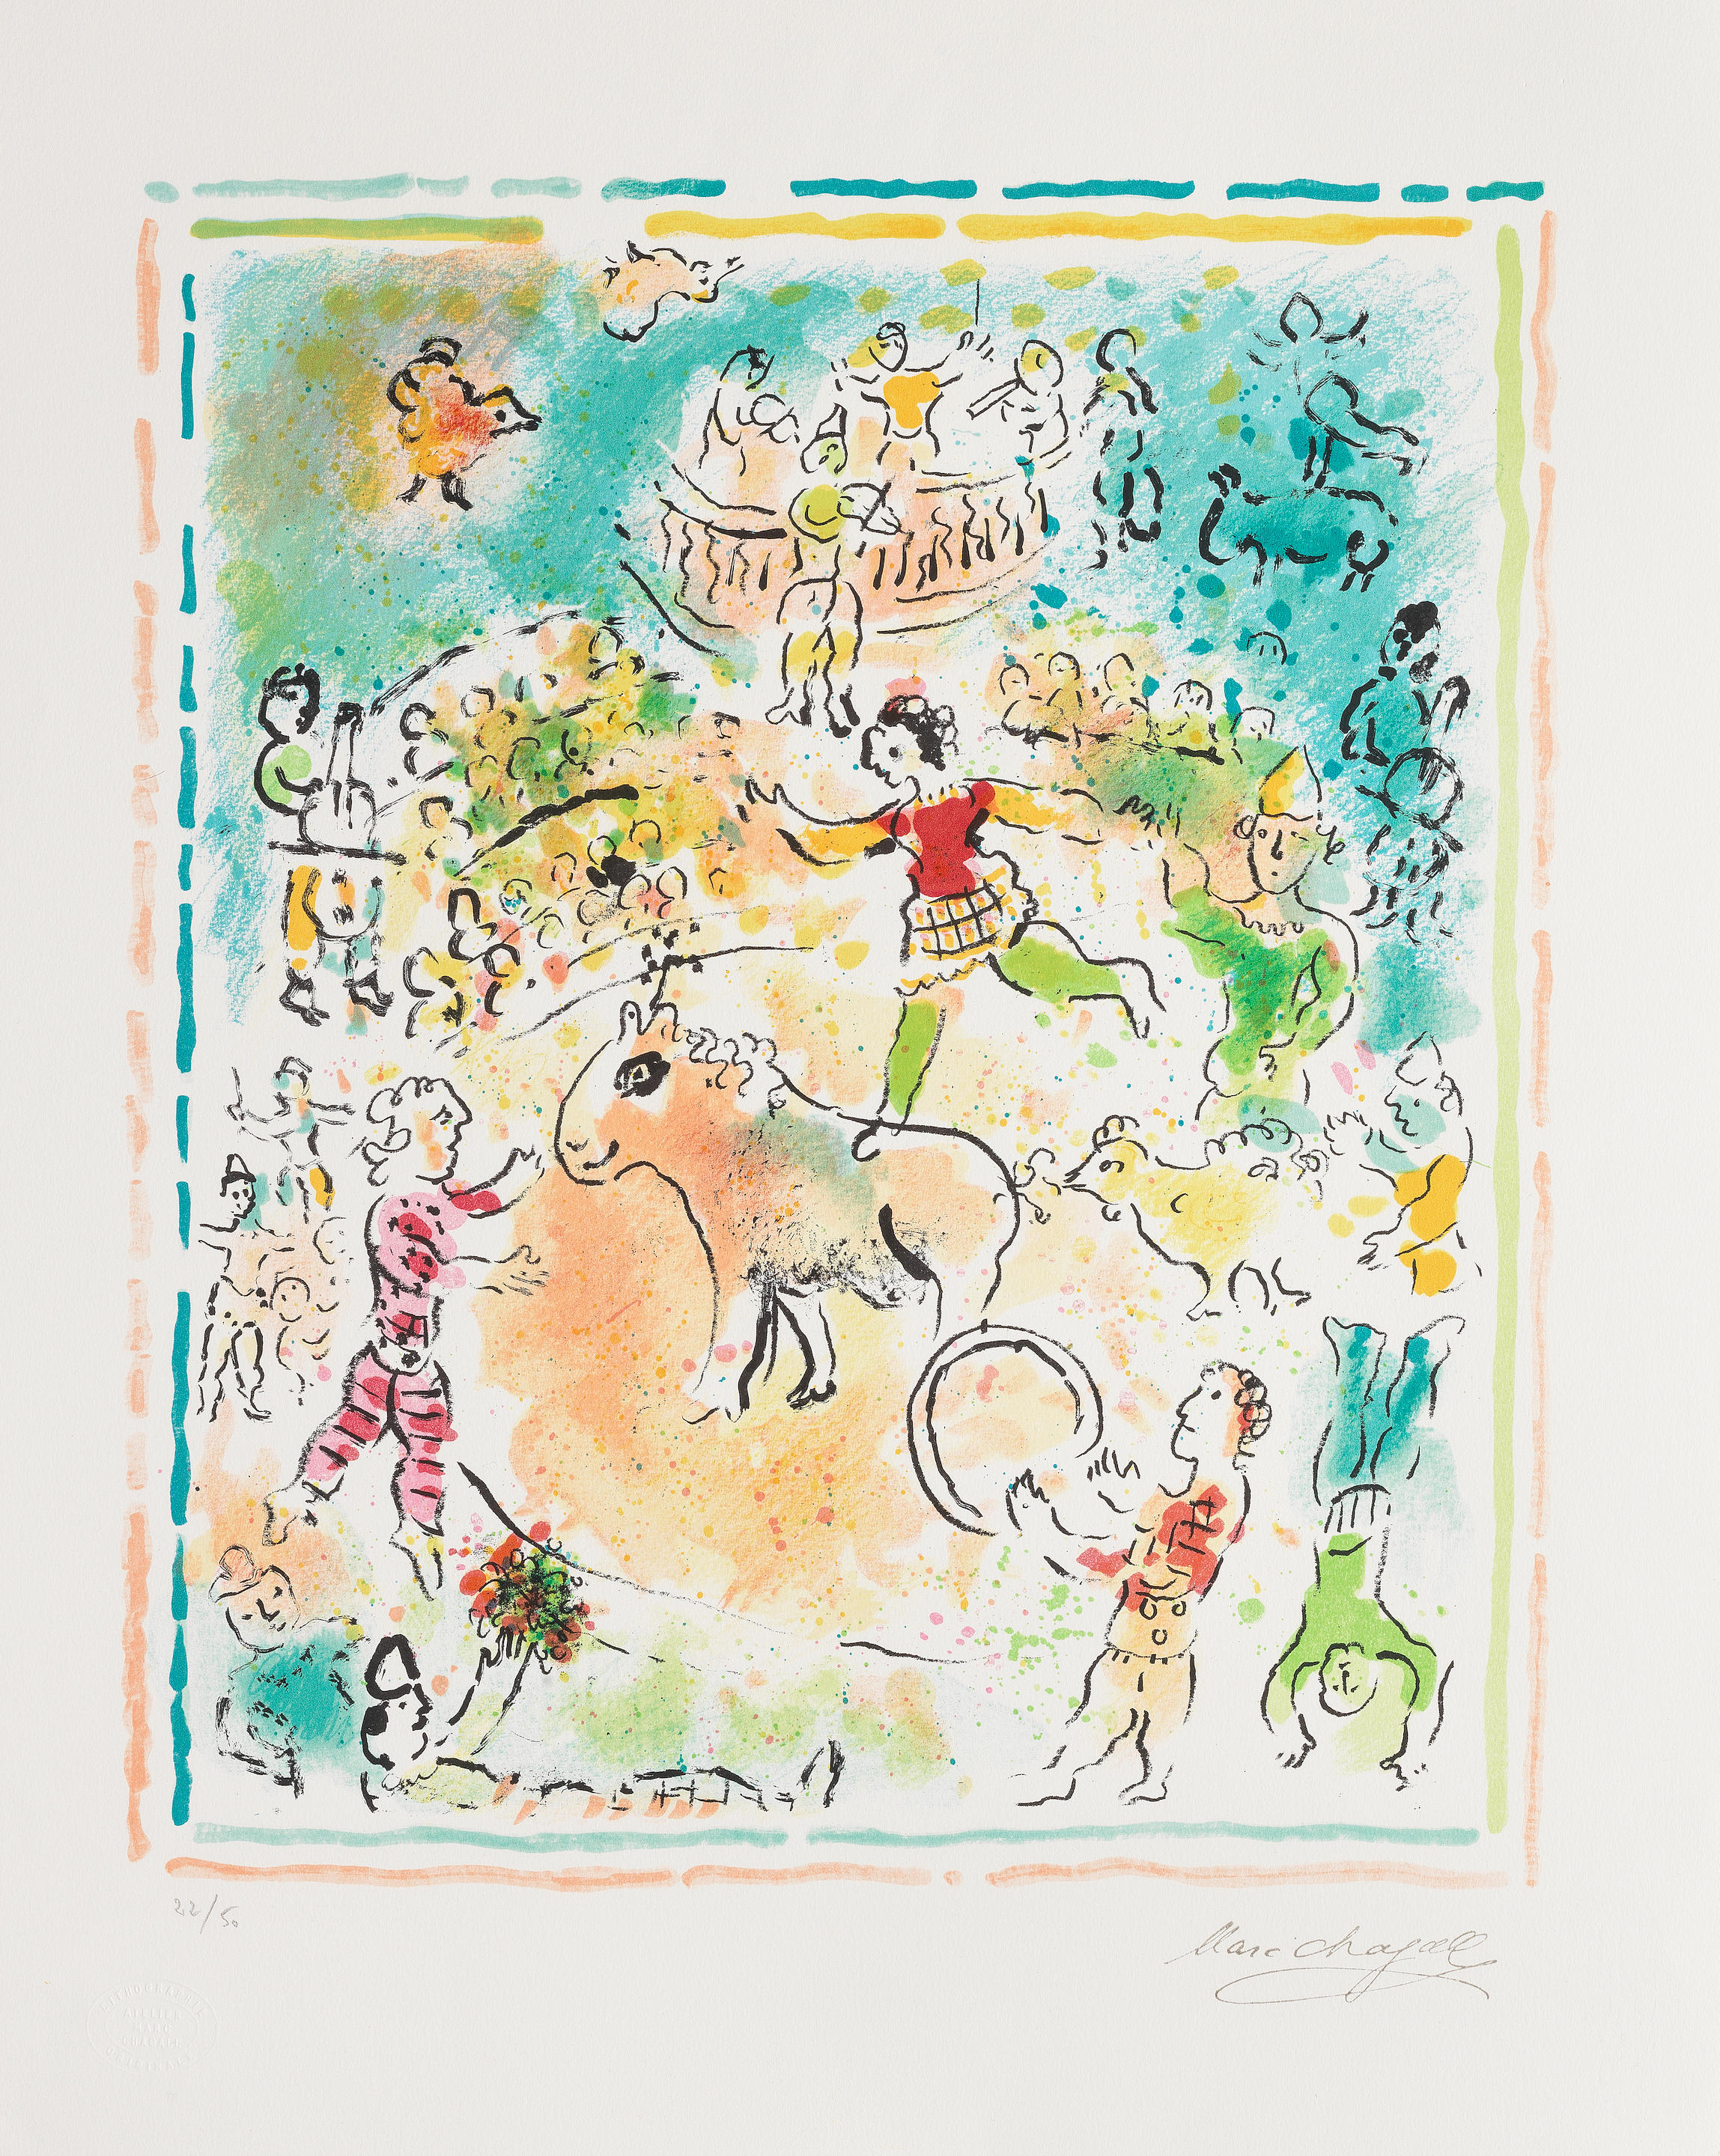 Marc Chagall (1887-1985) Burlesque au Cirque, Février 1985 Lithograph in colours, 1985, on Arches wove paper, stamp signed and numbered 22/50 in pencil, with the artist's studio blindstamp, the full sheet with deckle edge at right, the colours strong and vibrant, in very good conditionImage 520 x 430mm. (20 1/2 x 16 7/8in.); Sheet 679 x 540mm. (26 3/4 x 21 1/4in.)